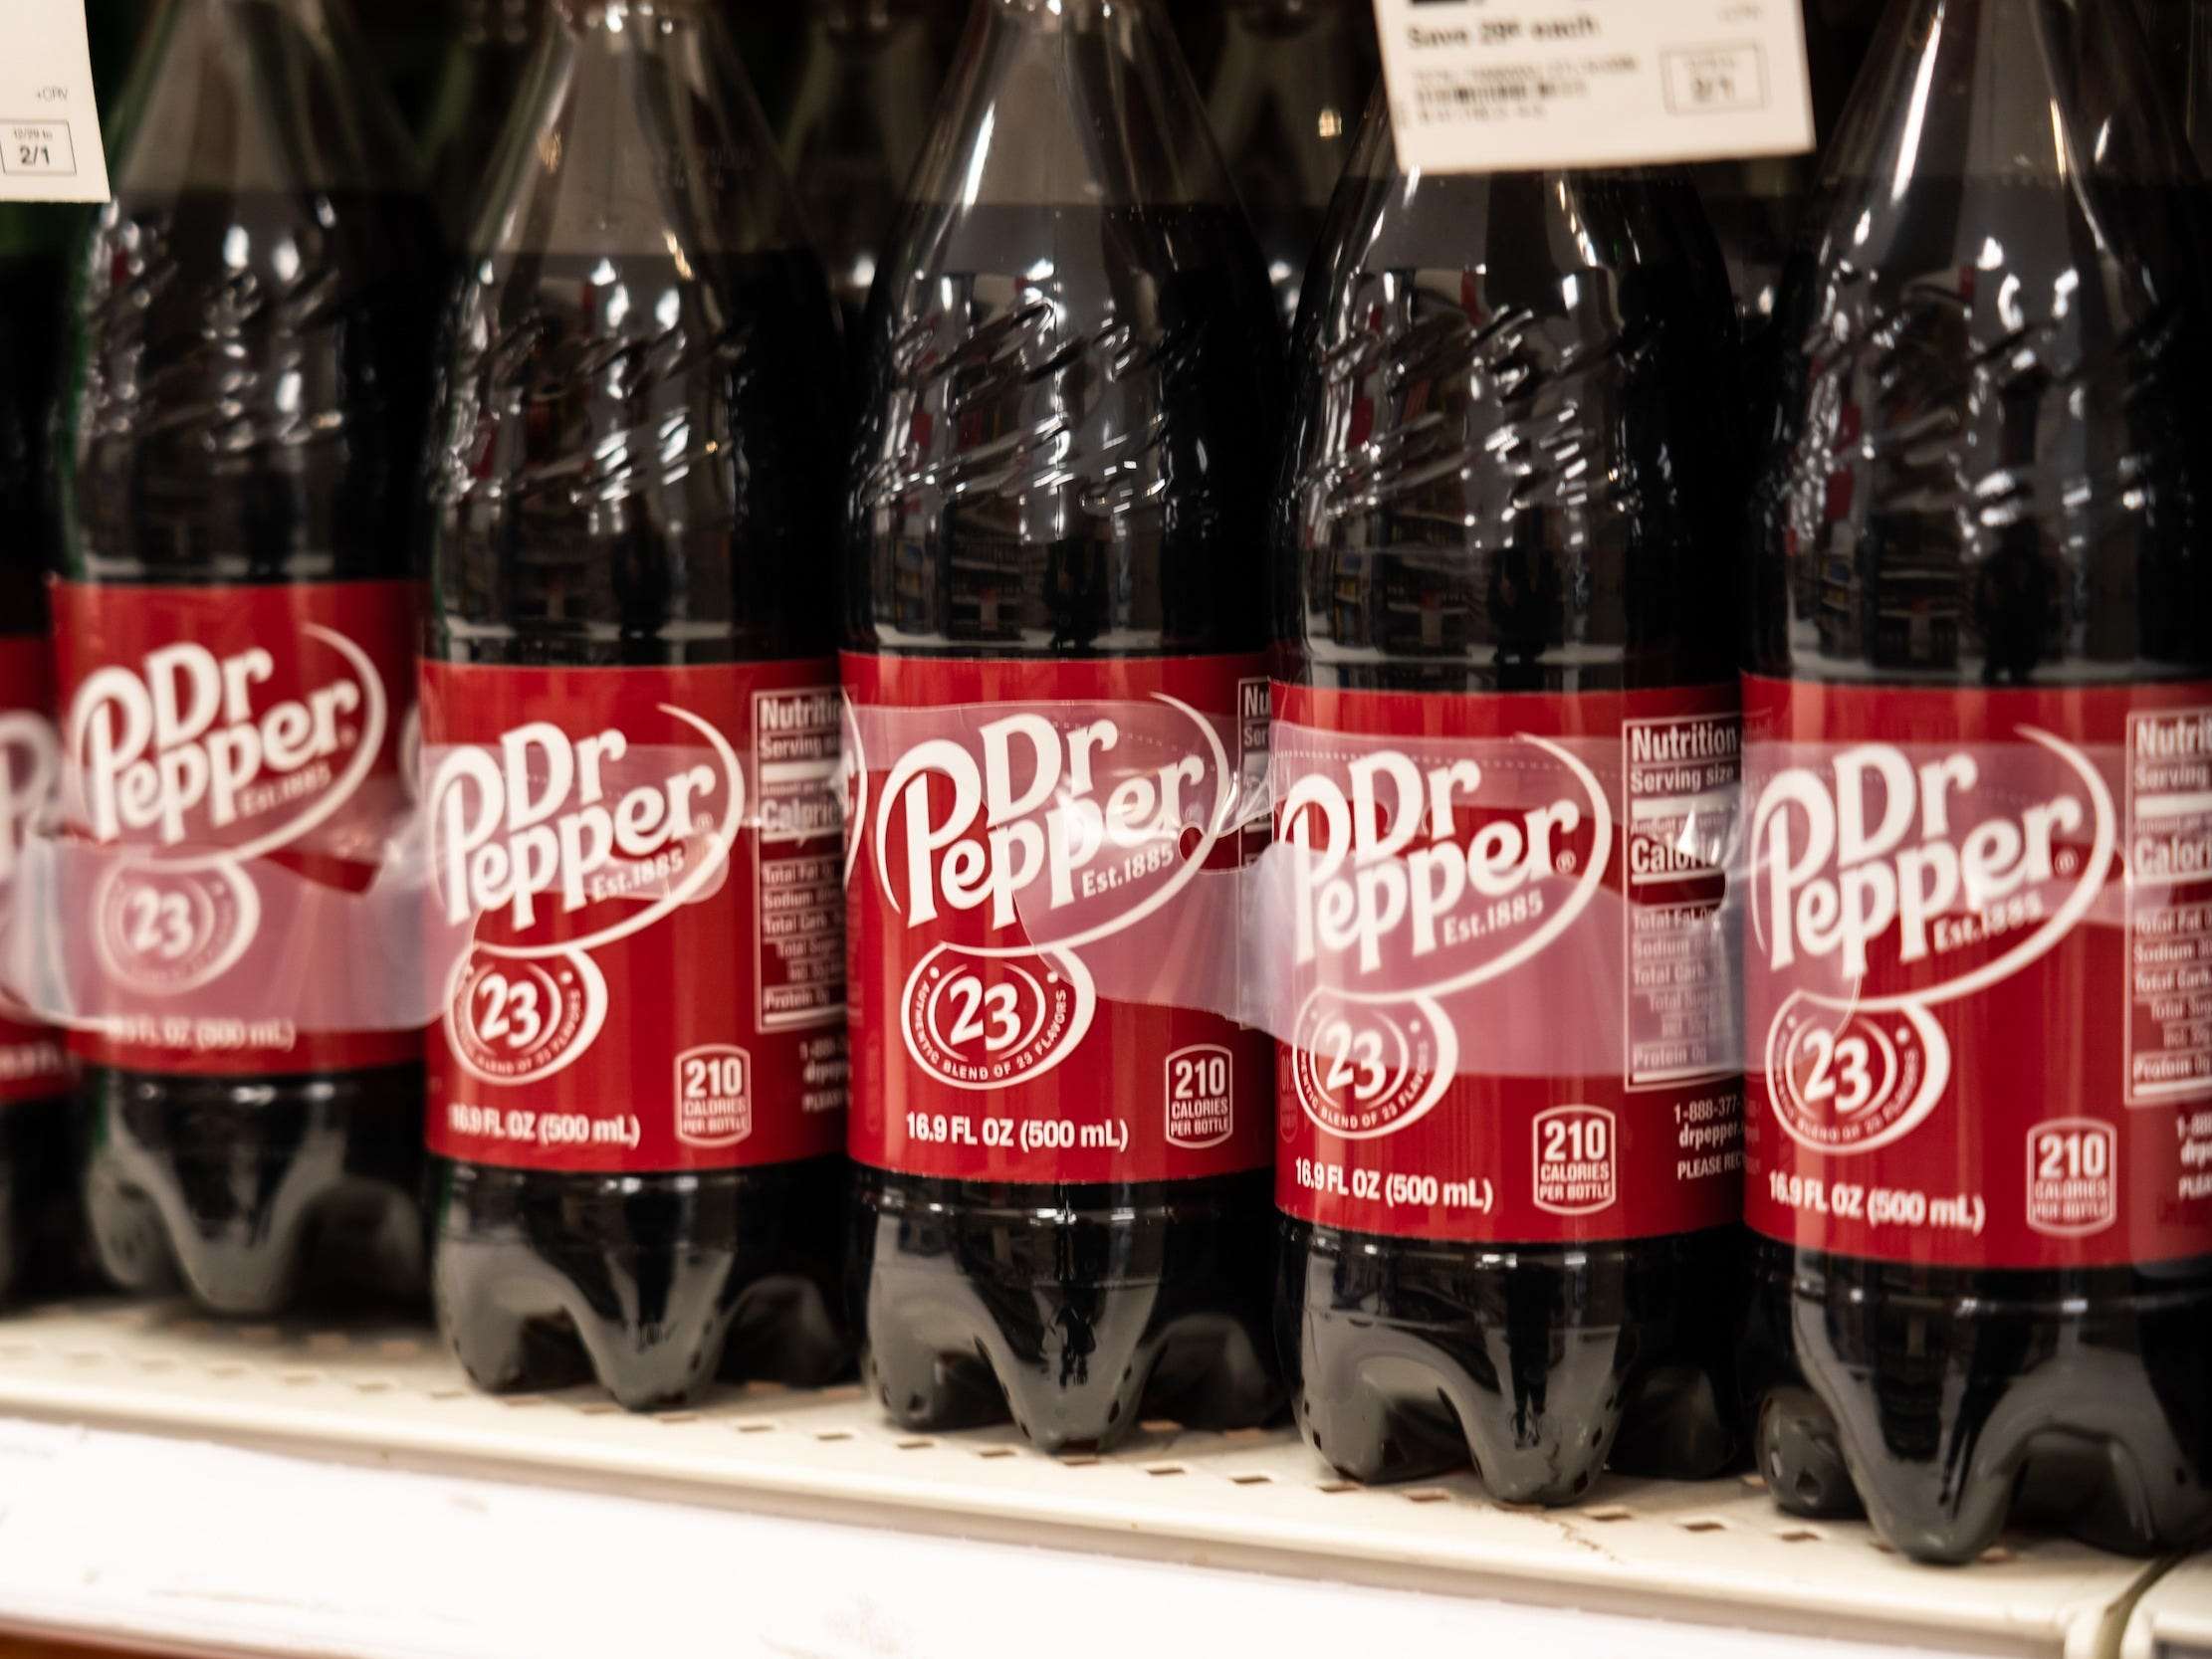 Dr Pepper confirms that some of its flavors are experiencing a shortage